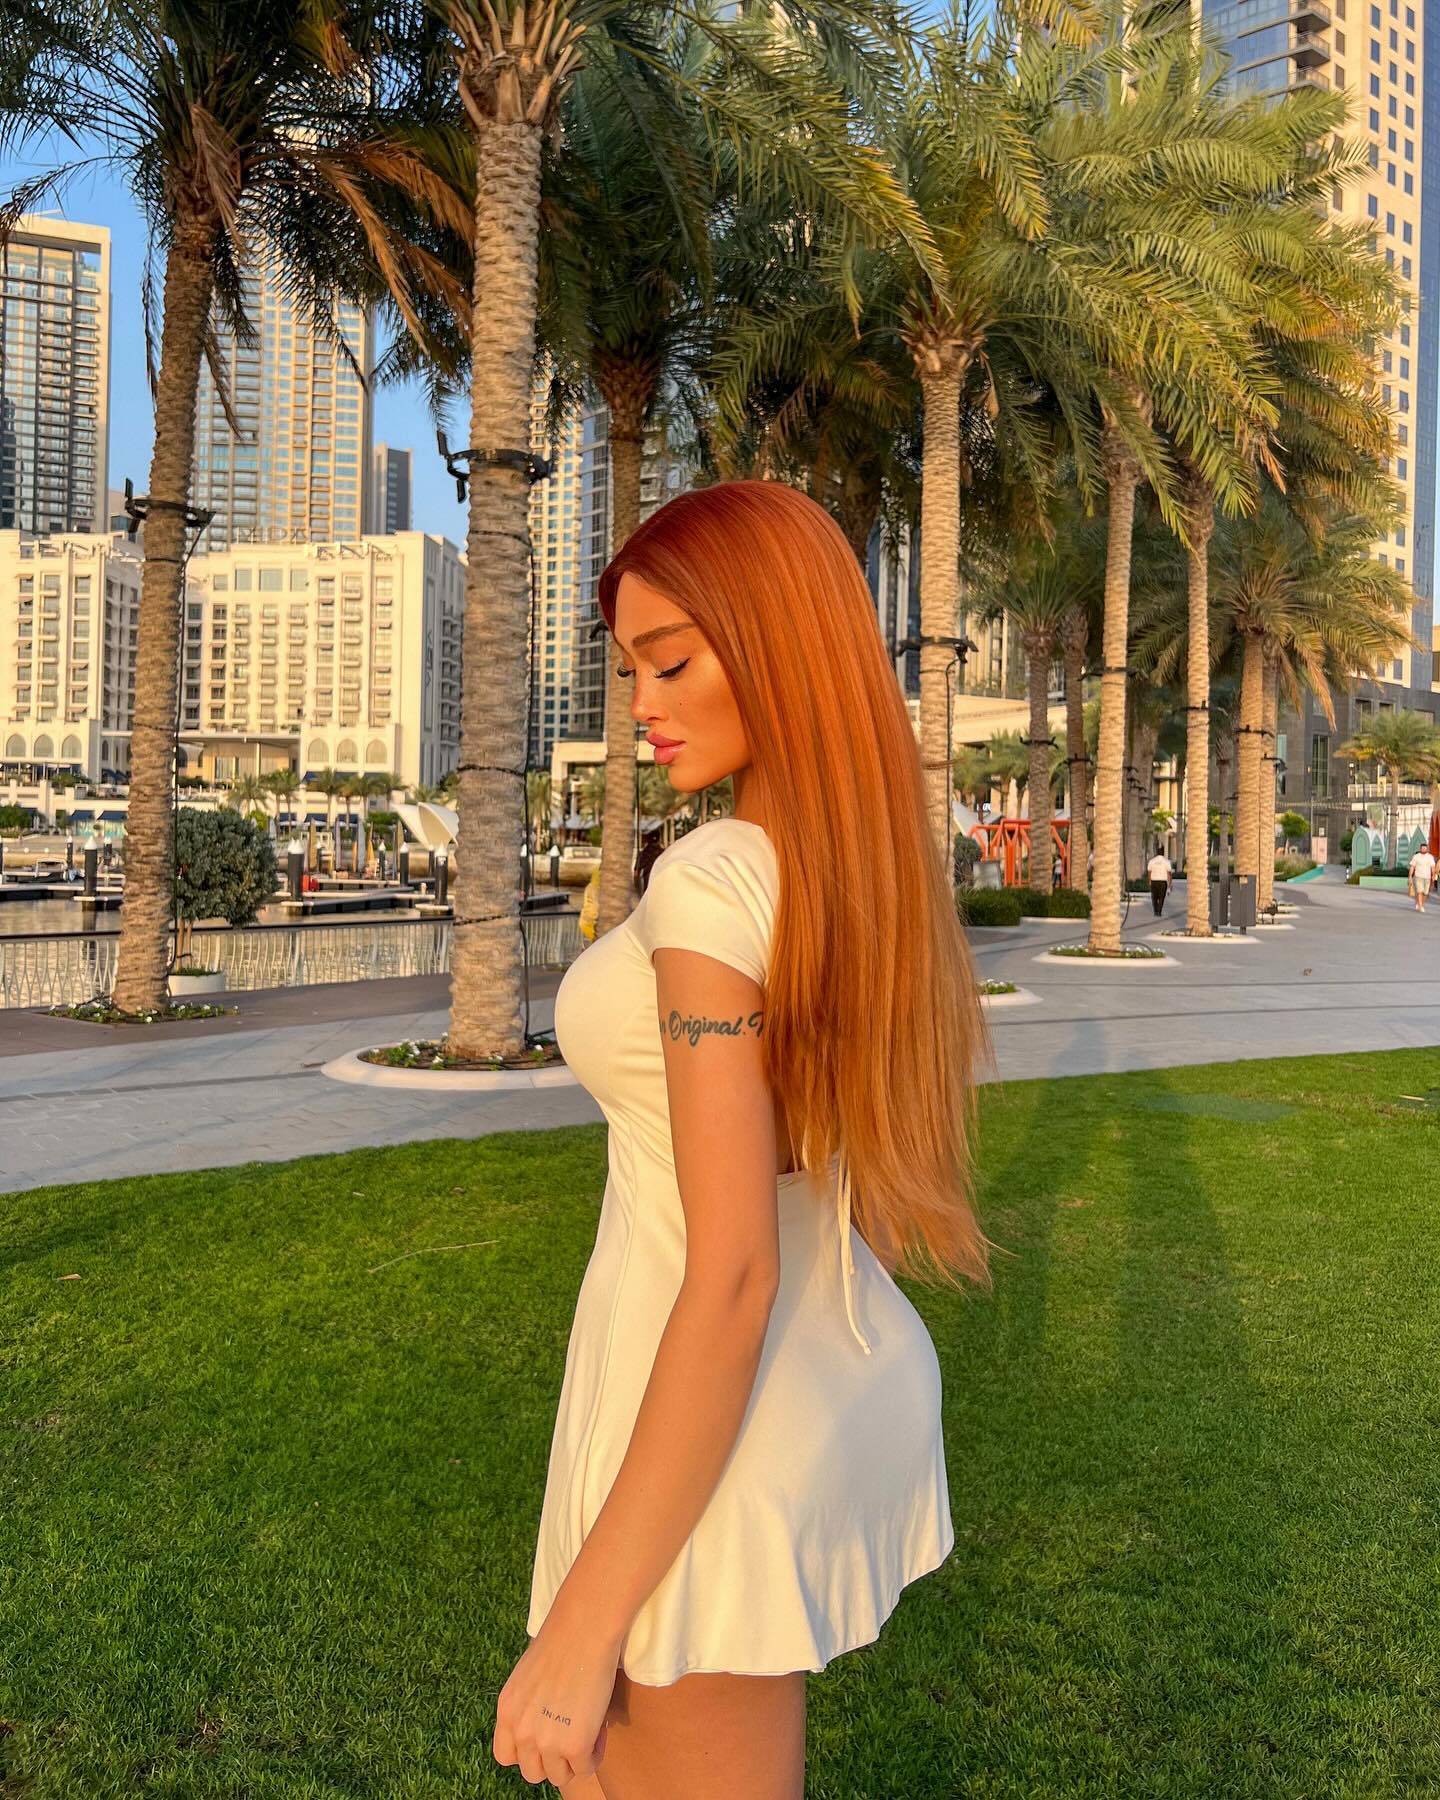 Everyone remembers the girl with the red hair✨
Lovely Dress from @ohpolly | Ad

#redheadgirl #ohpollydress #fashionootd